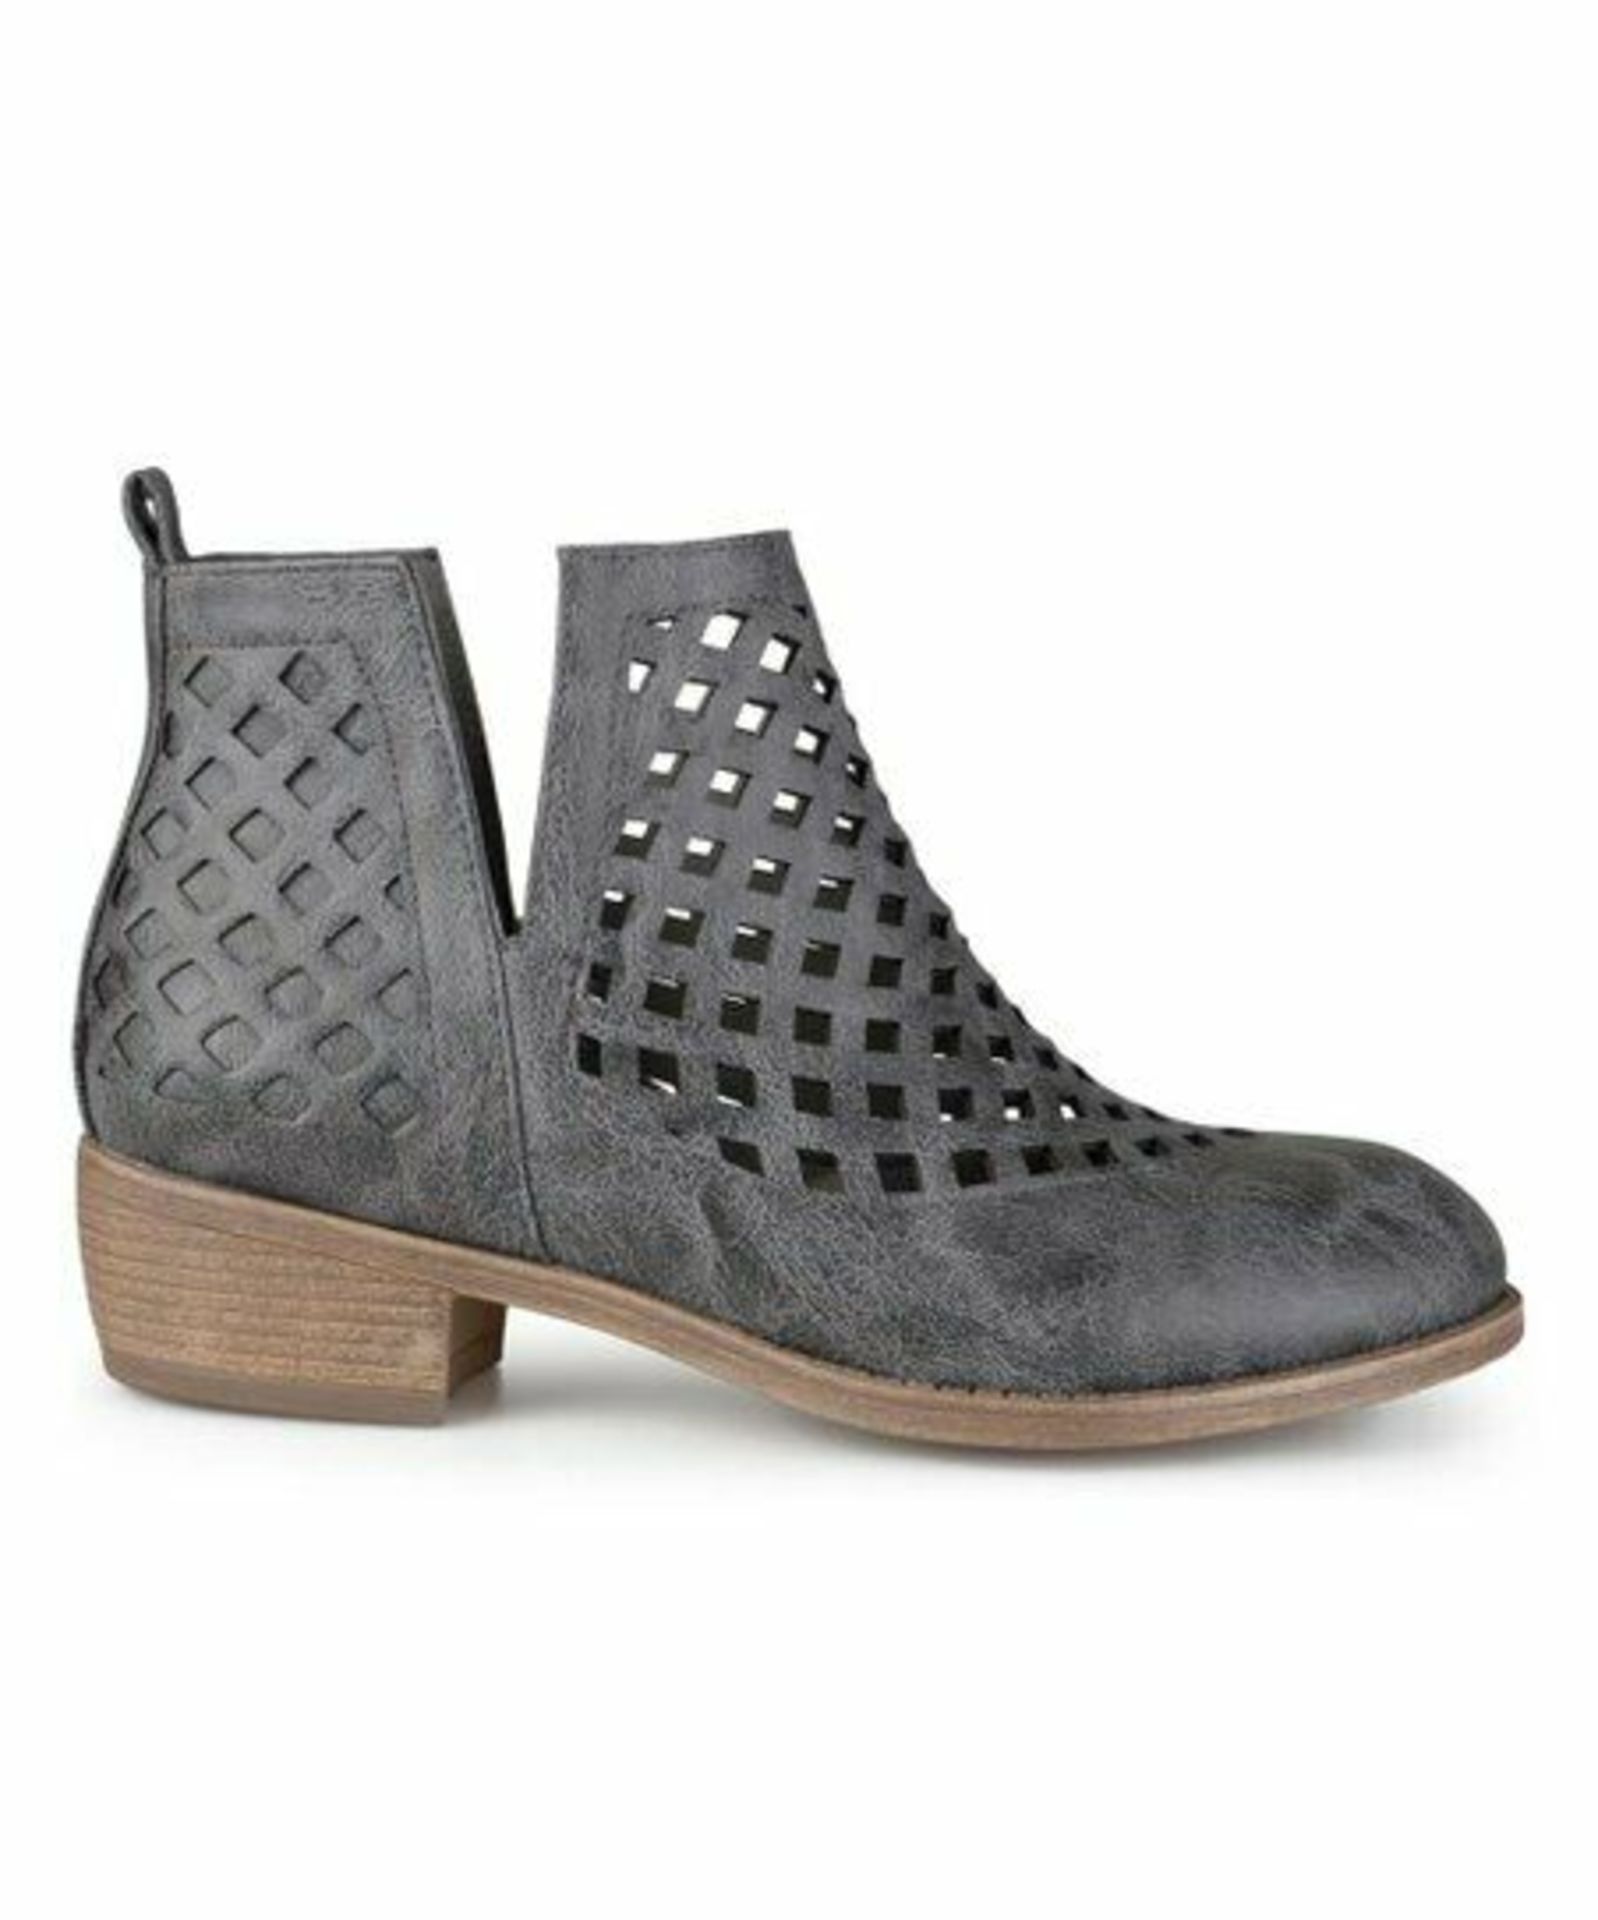 Brinley Co. Gray Cutout Karma Bootie (Uk Size:4/Us Size:6) (New With Box) [Ref: 40488588-B-003] - Image 4 of 4